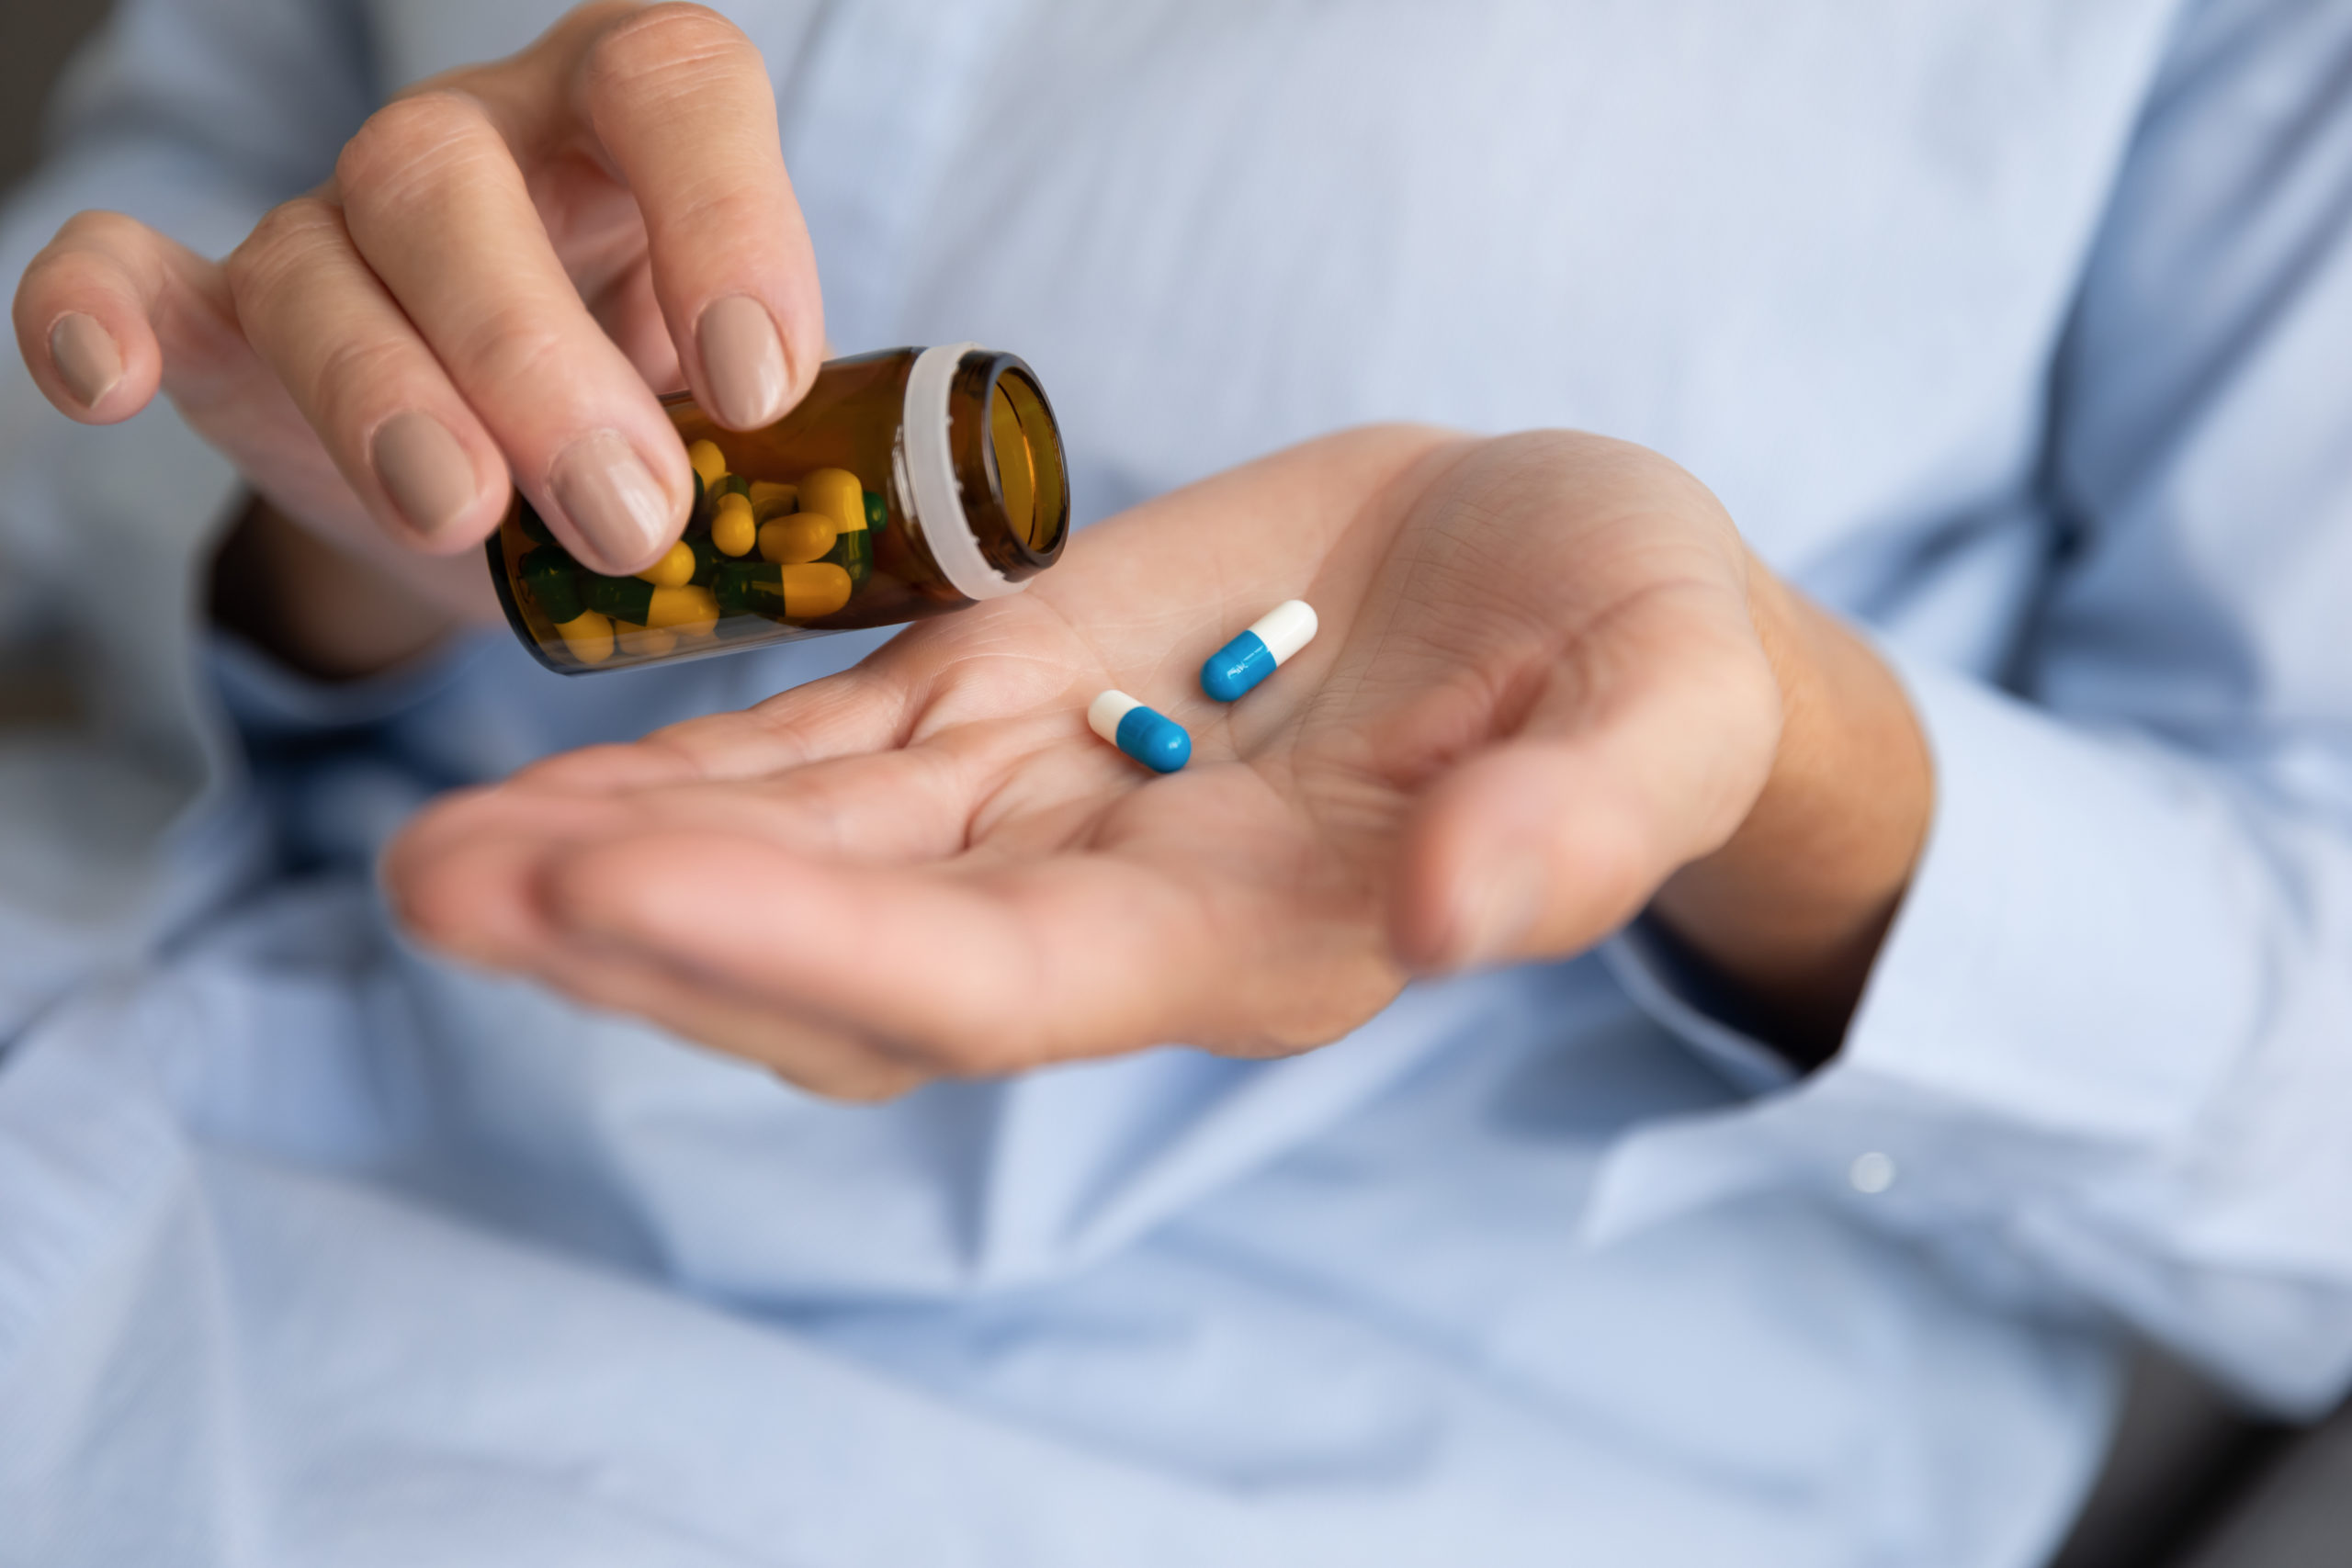 Are There Outpatient Programs for Prescription Drug Abuse?